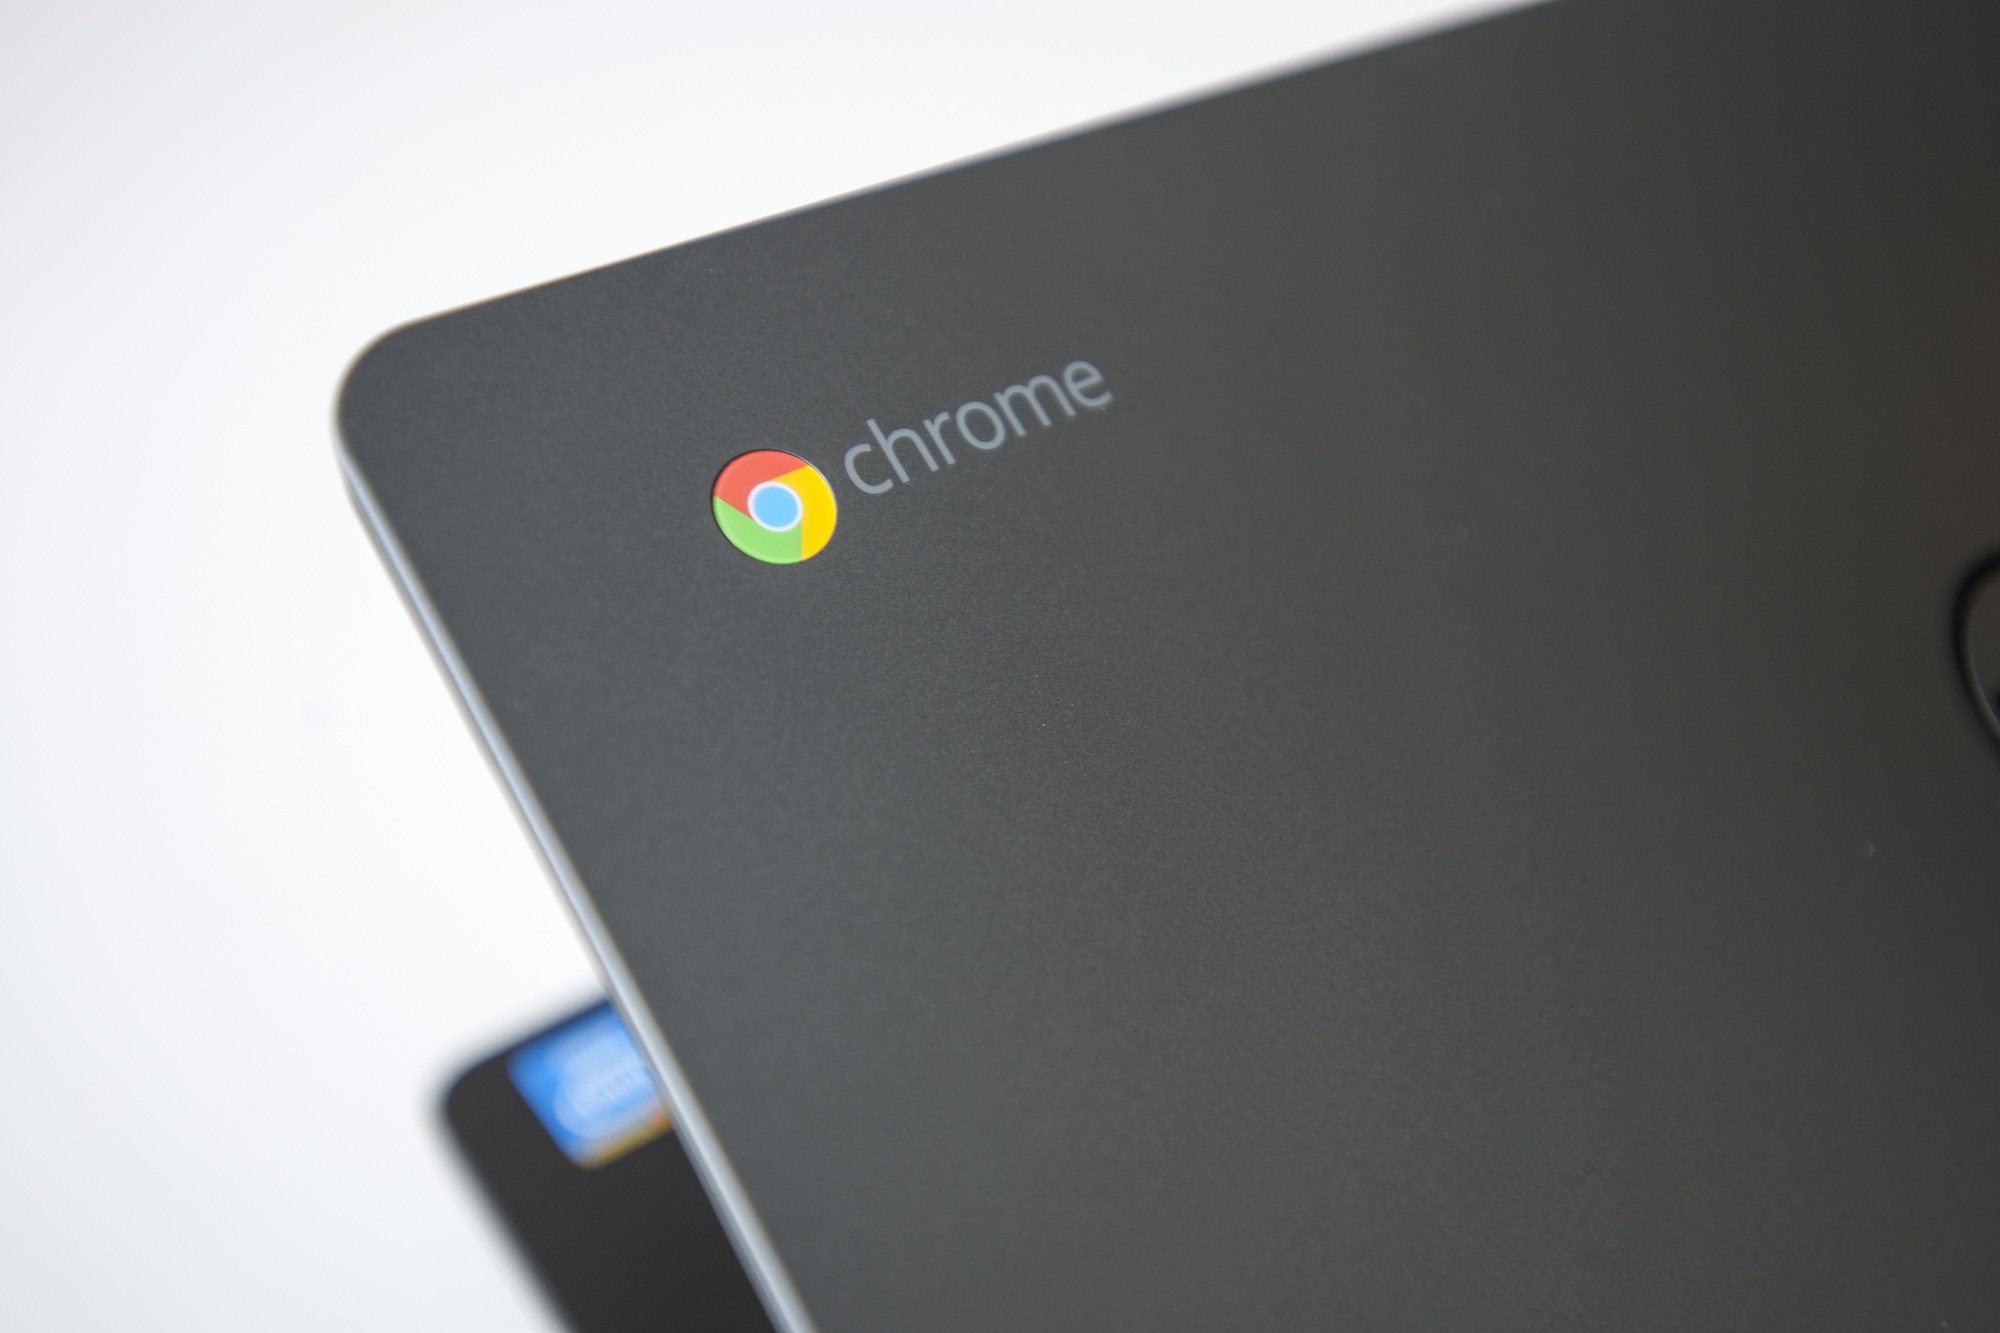 Chromebook Overview